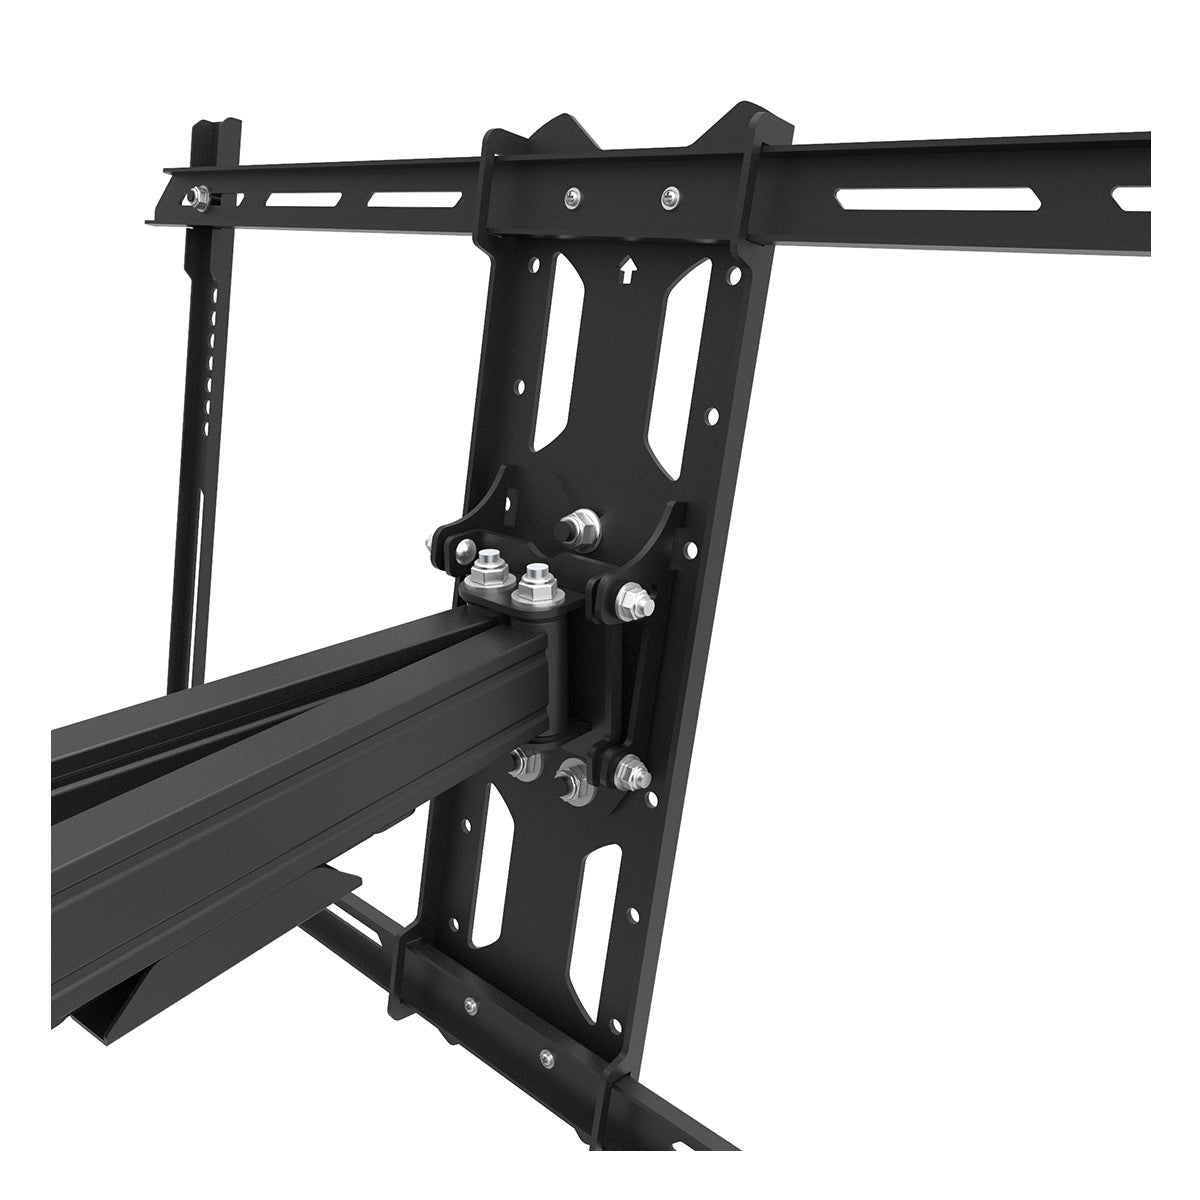 Kanto PDX650SG Stainless Steel Full-Motion Dual Stud Outdoor TV Mount for 37&rdquo; - 75&rdquo; TVs